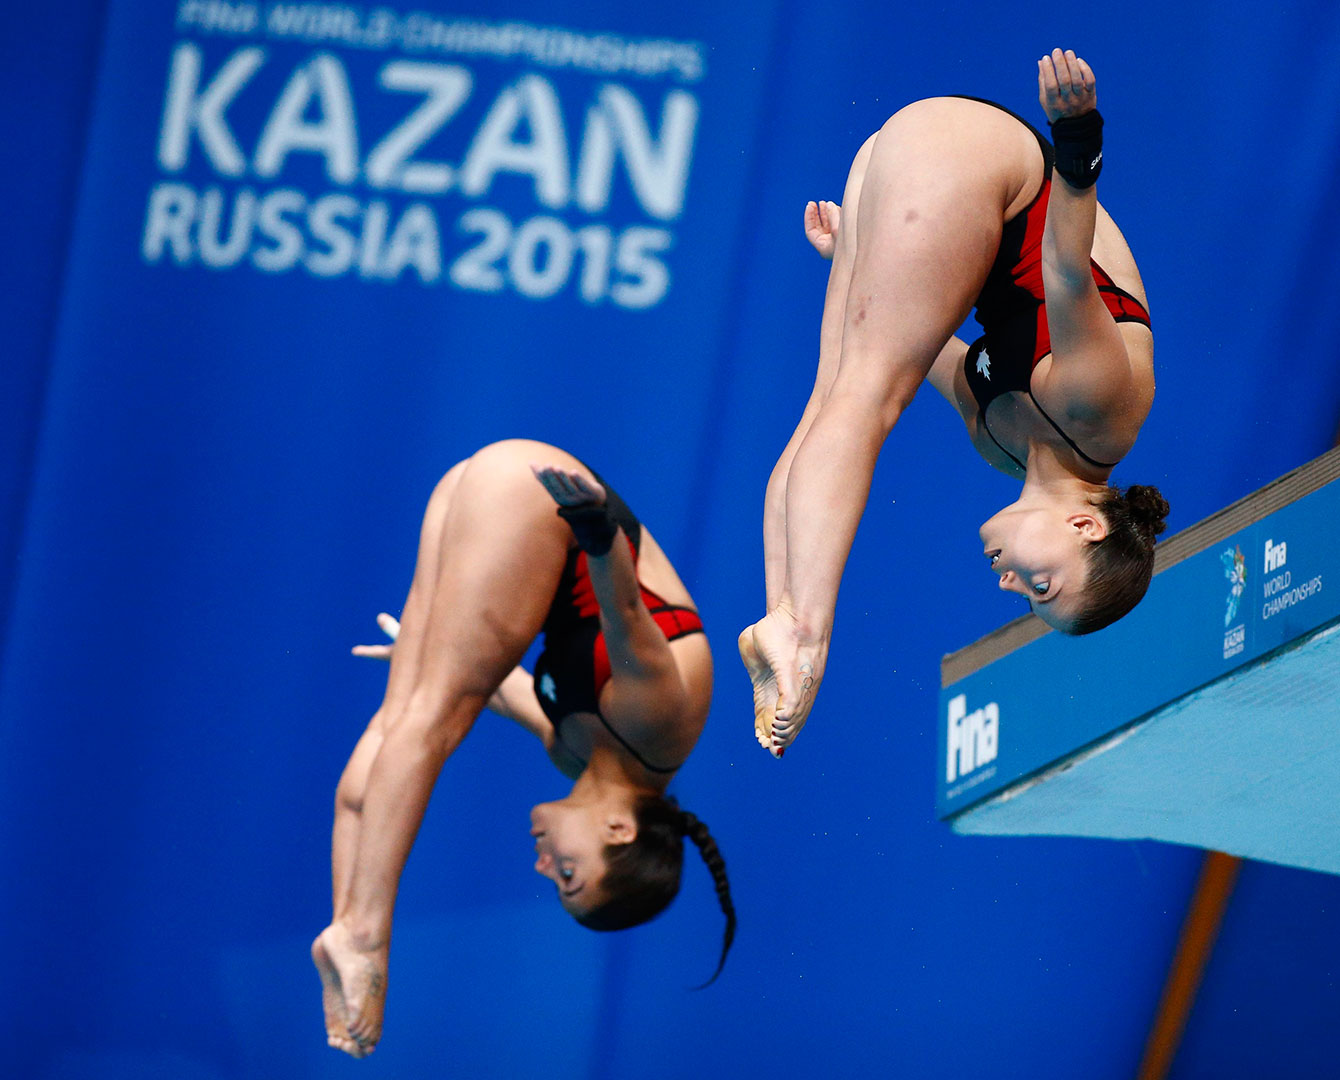 Meaghan Benfeito (left) and Roseline Filion at the 2015 FINA World Championships. 